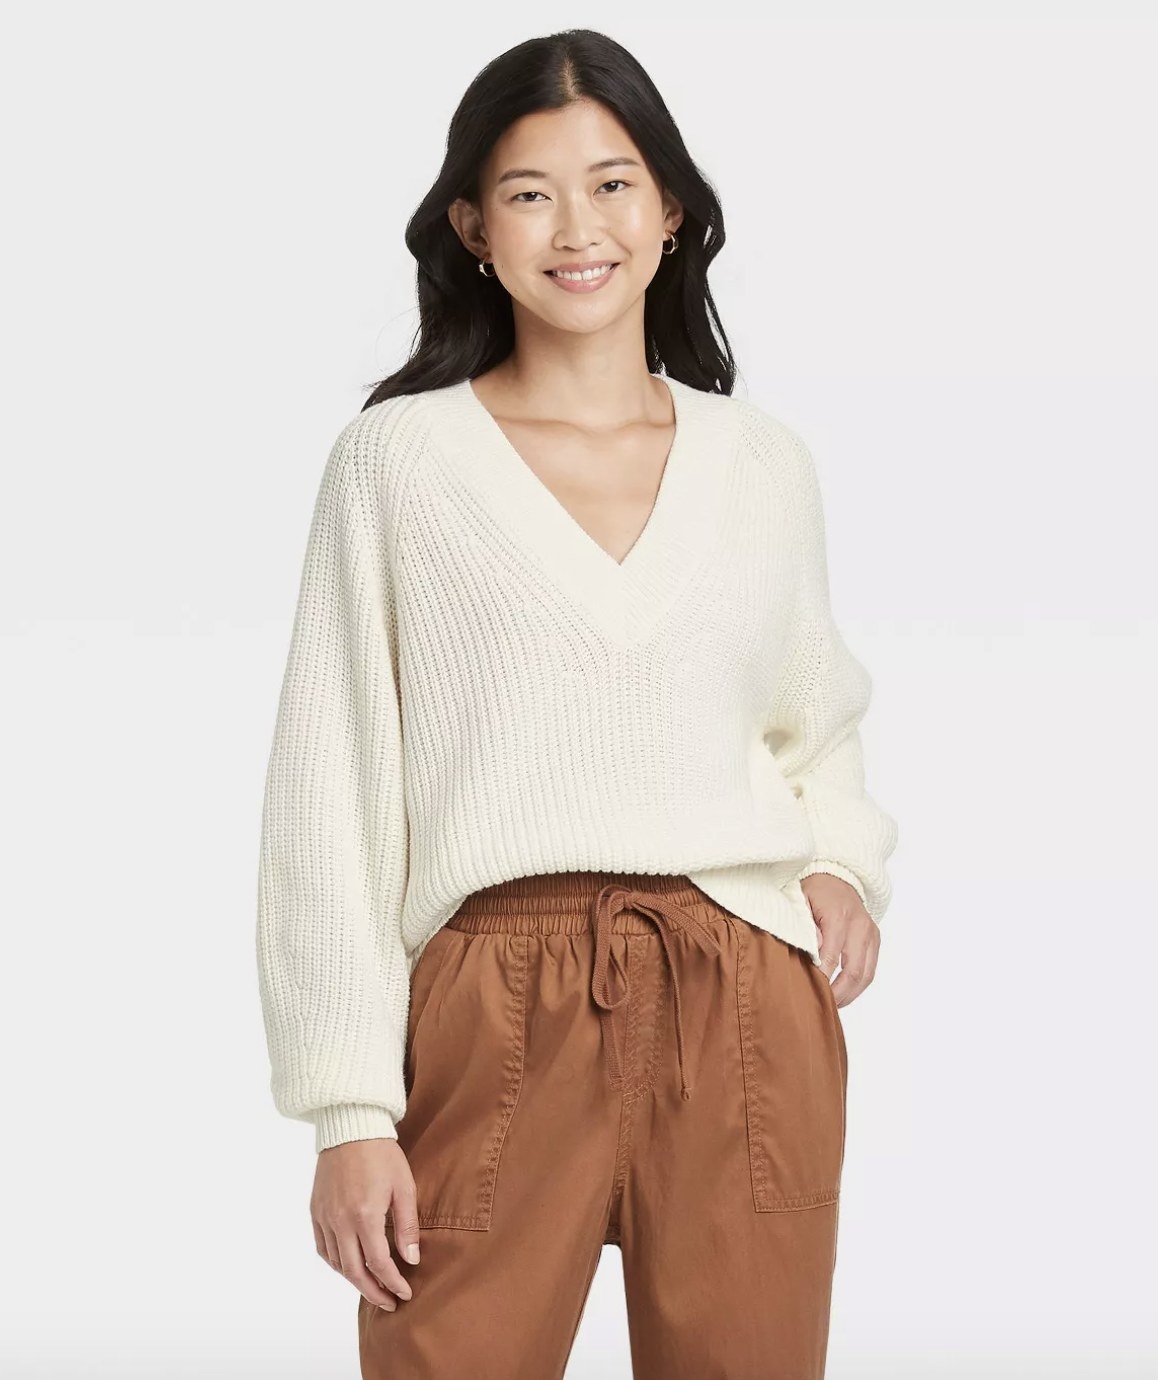 The white chunky v-neck sweater has vertical ribbing and cuffs